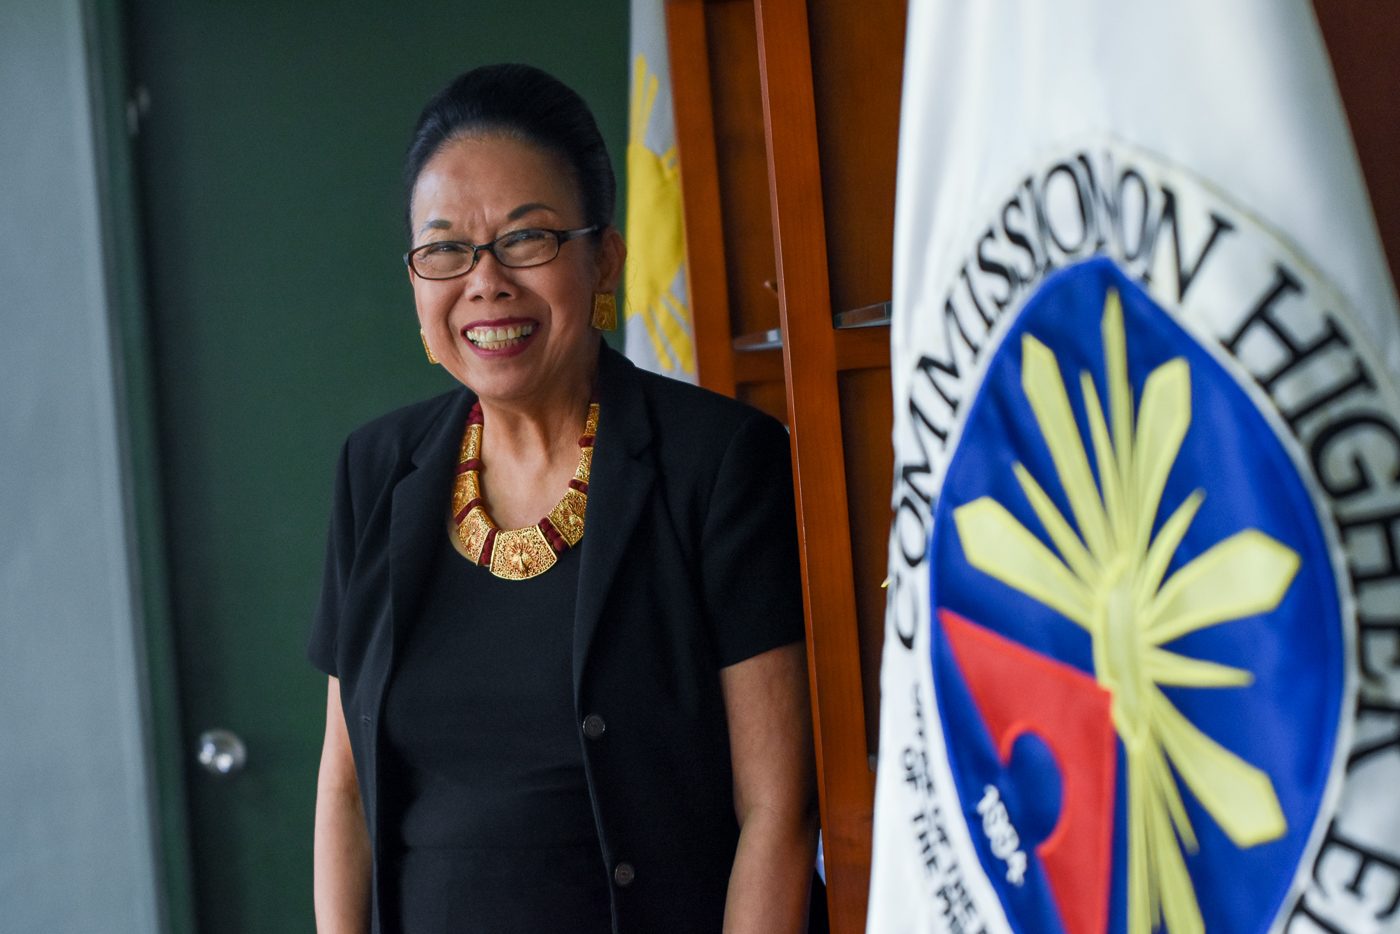 Licuanan proud of leveling opportunities in public, private education